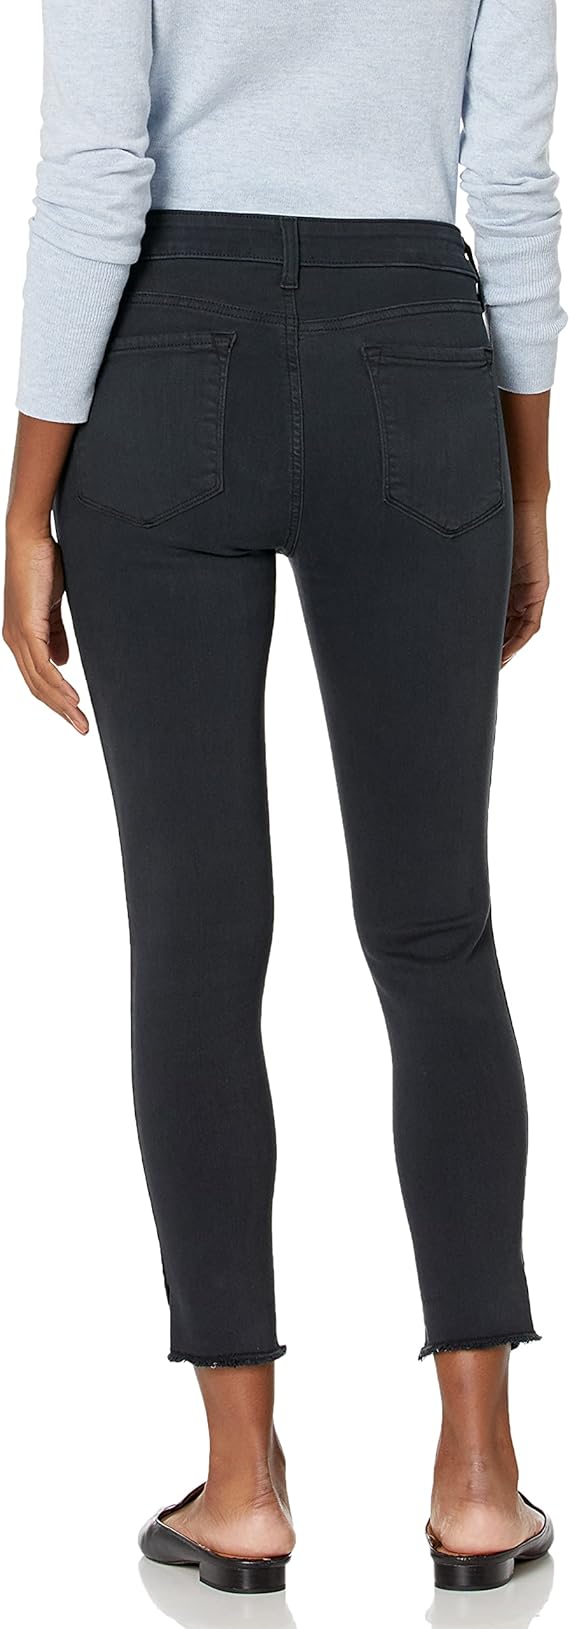 Levis Womens 720 High Rise Super Skinny Jeans